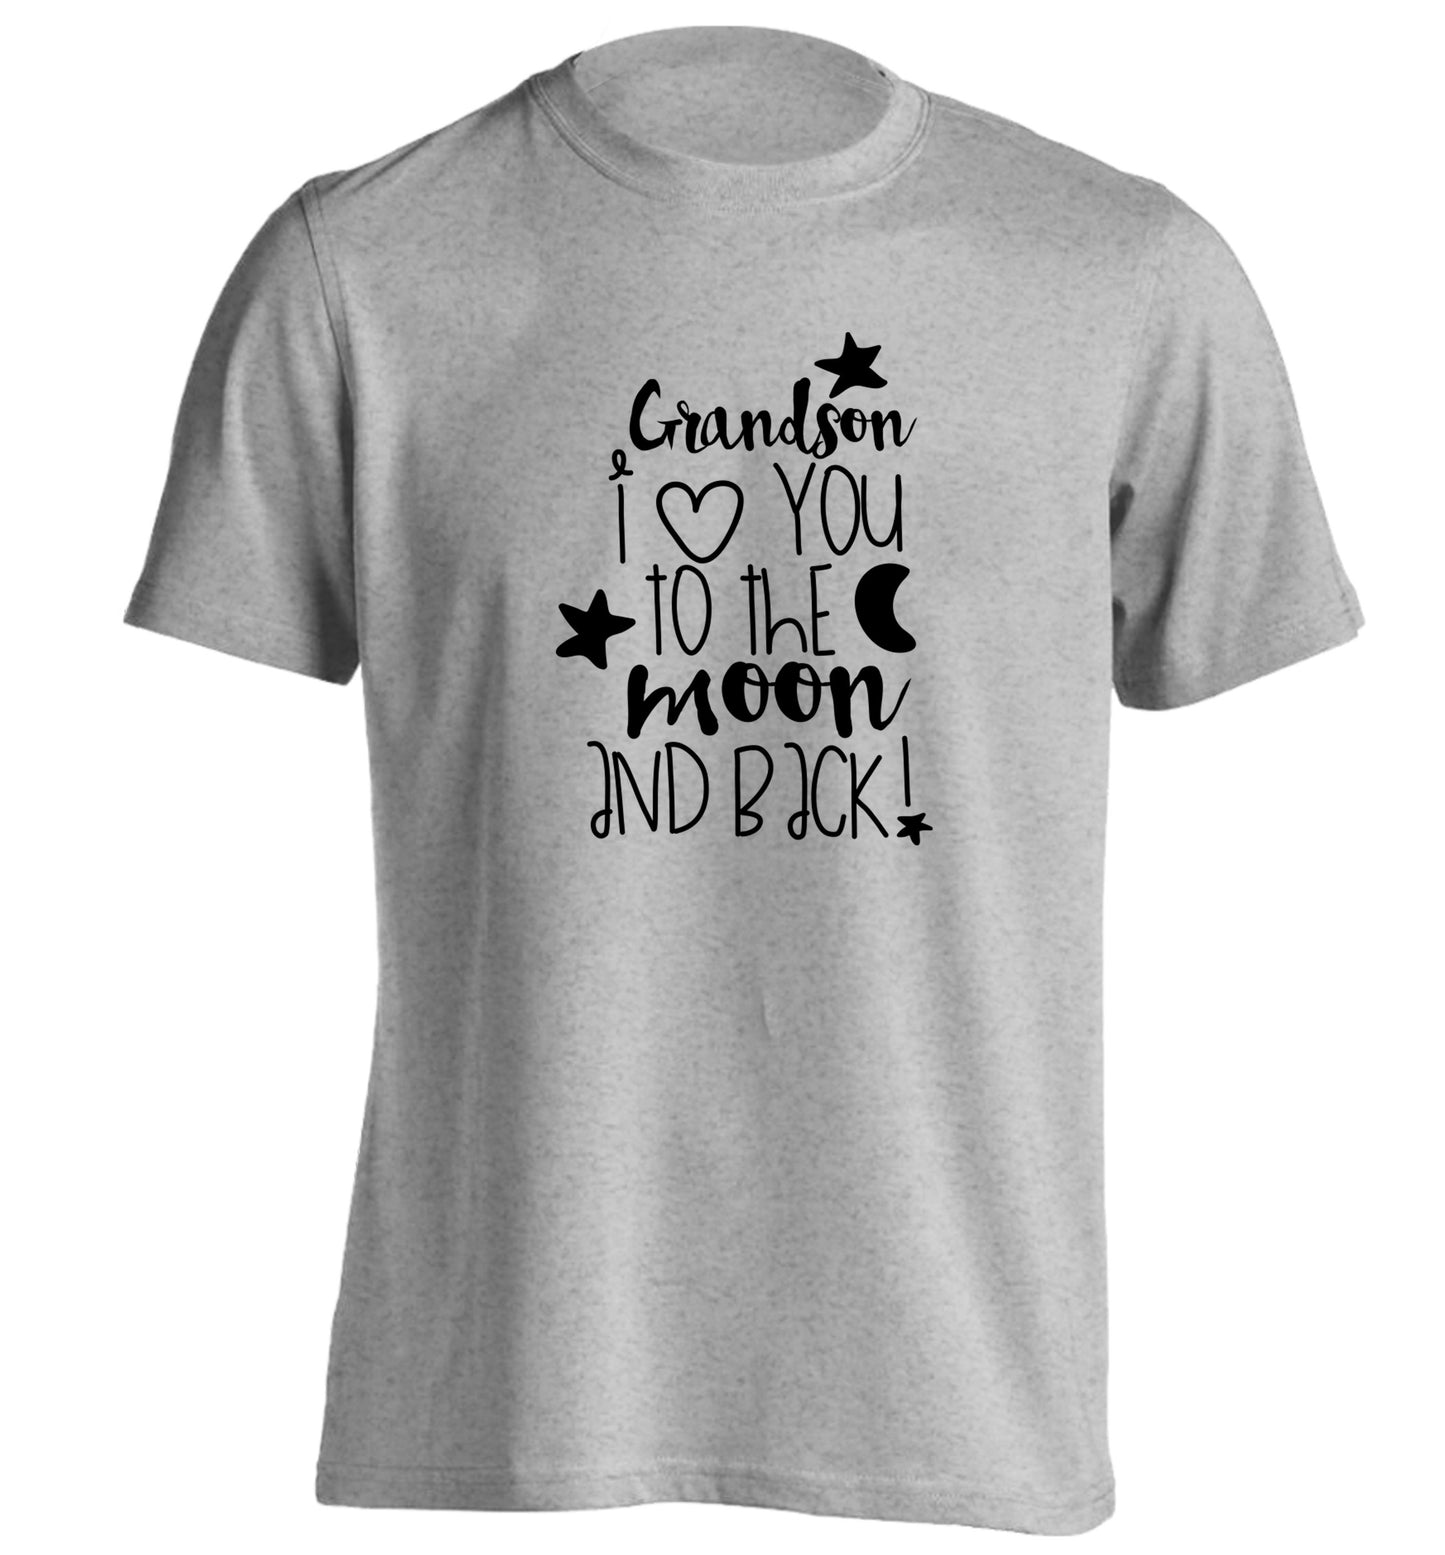 Grandson I love you to the moon and back adults unisex grey Tshirt 2XL